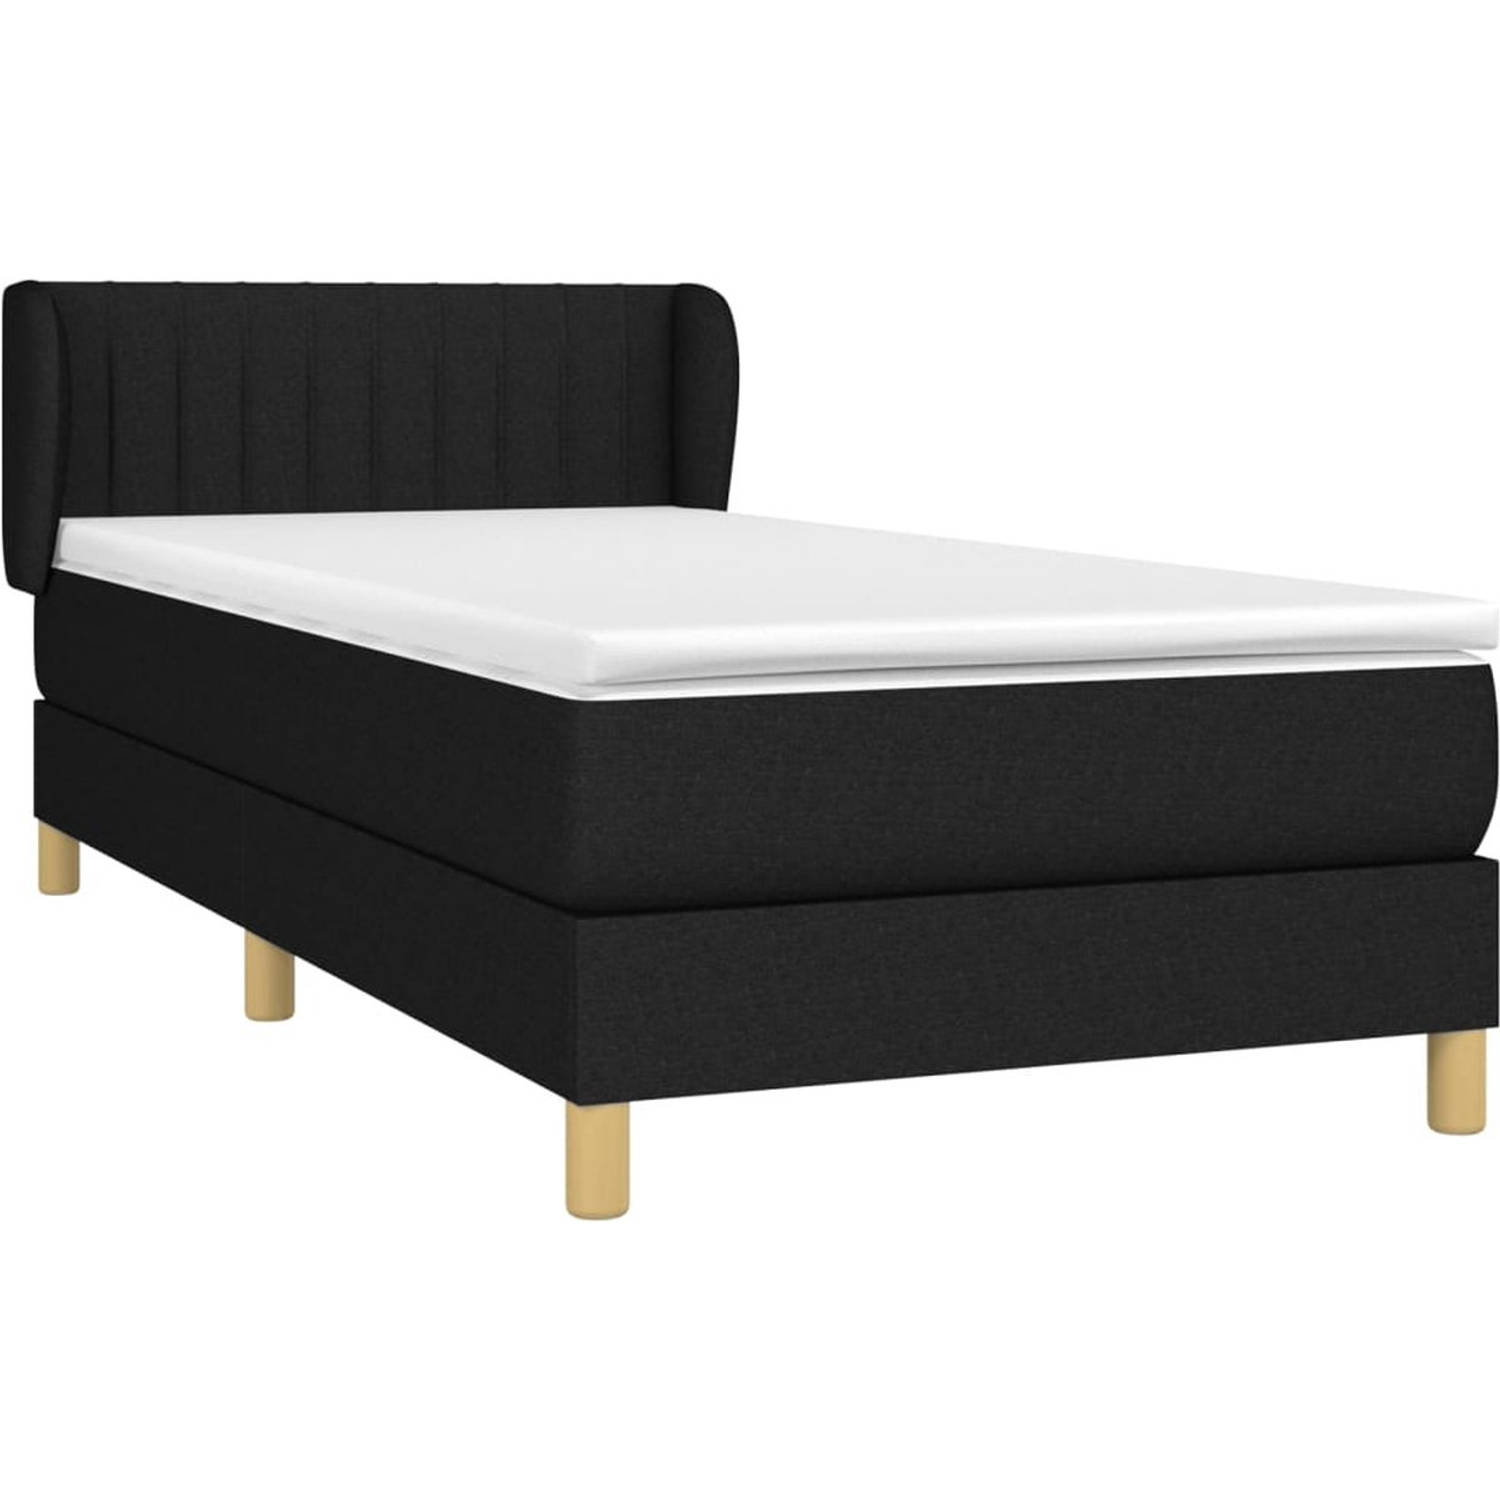 The Living Store Boxspringbed - Comfort - Bed - 203 x 83 x 78/88 cm - Zwart